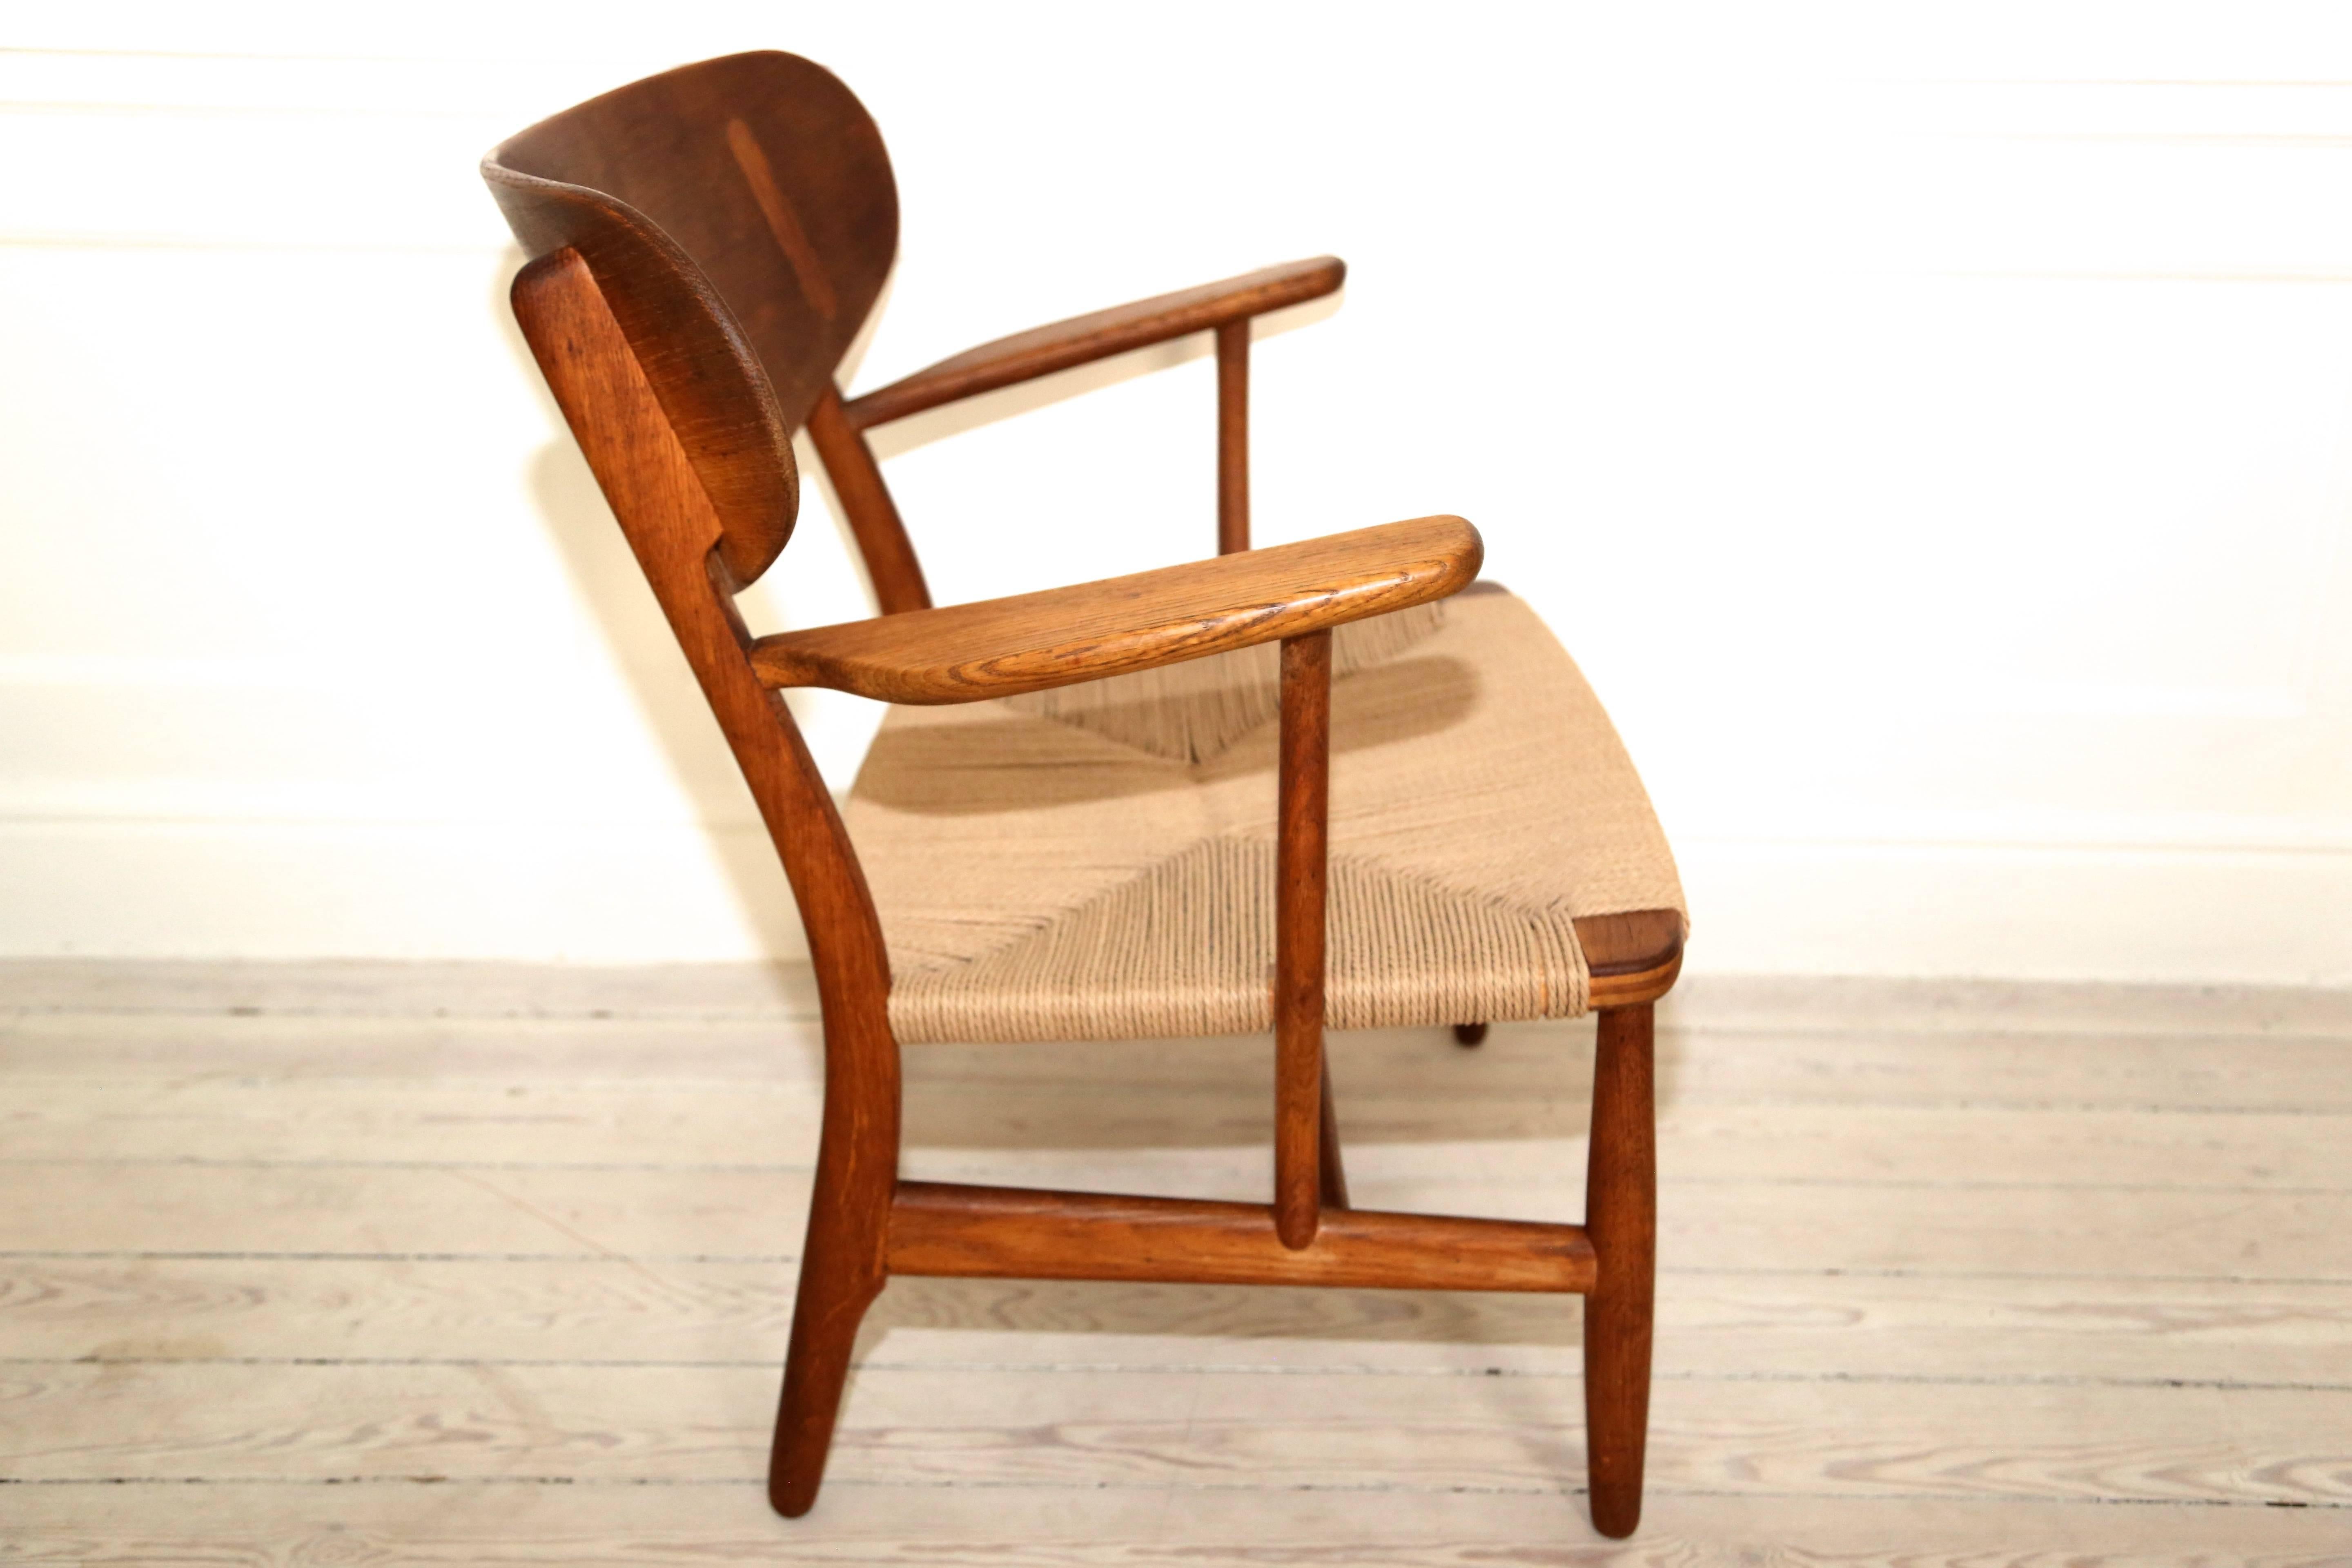 Original oak armchair with wide paddle form arms and sculpted and inlaid back. New Danish paper cord seat finished by Larssons Korgmakeri. 

The chair was designed by Hans J. Wegner and manufactured by Carl Hansen & Søn, 1951.

Provenance,